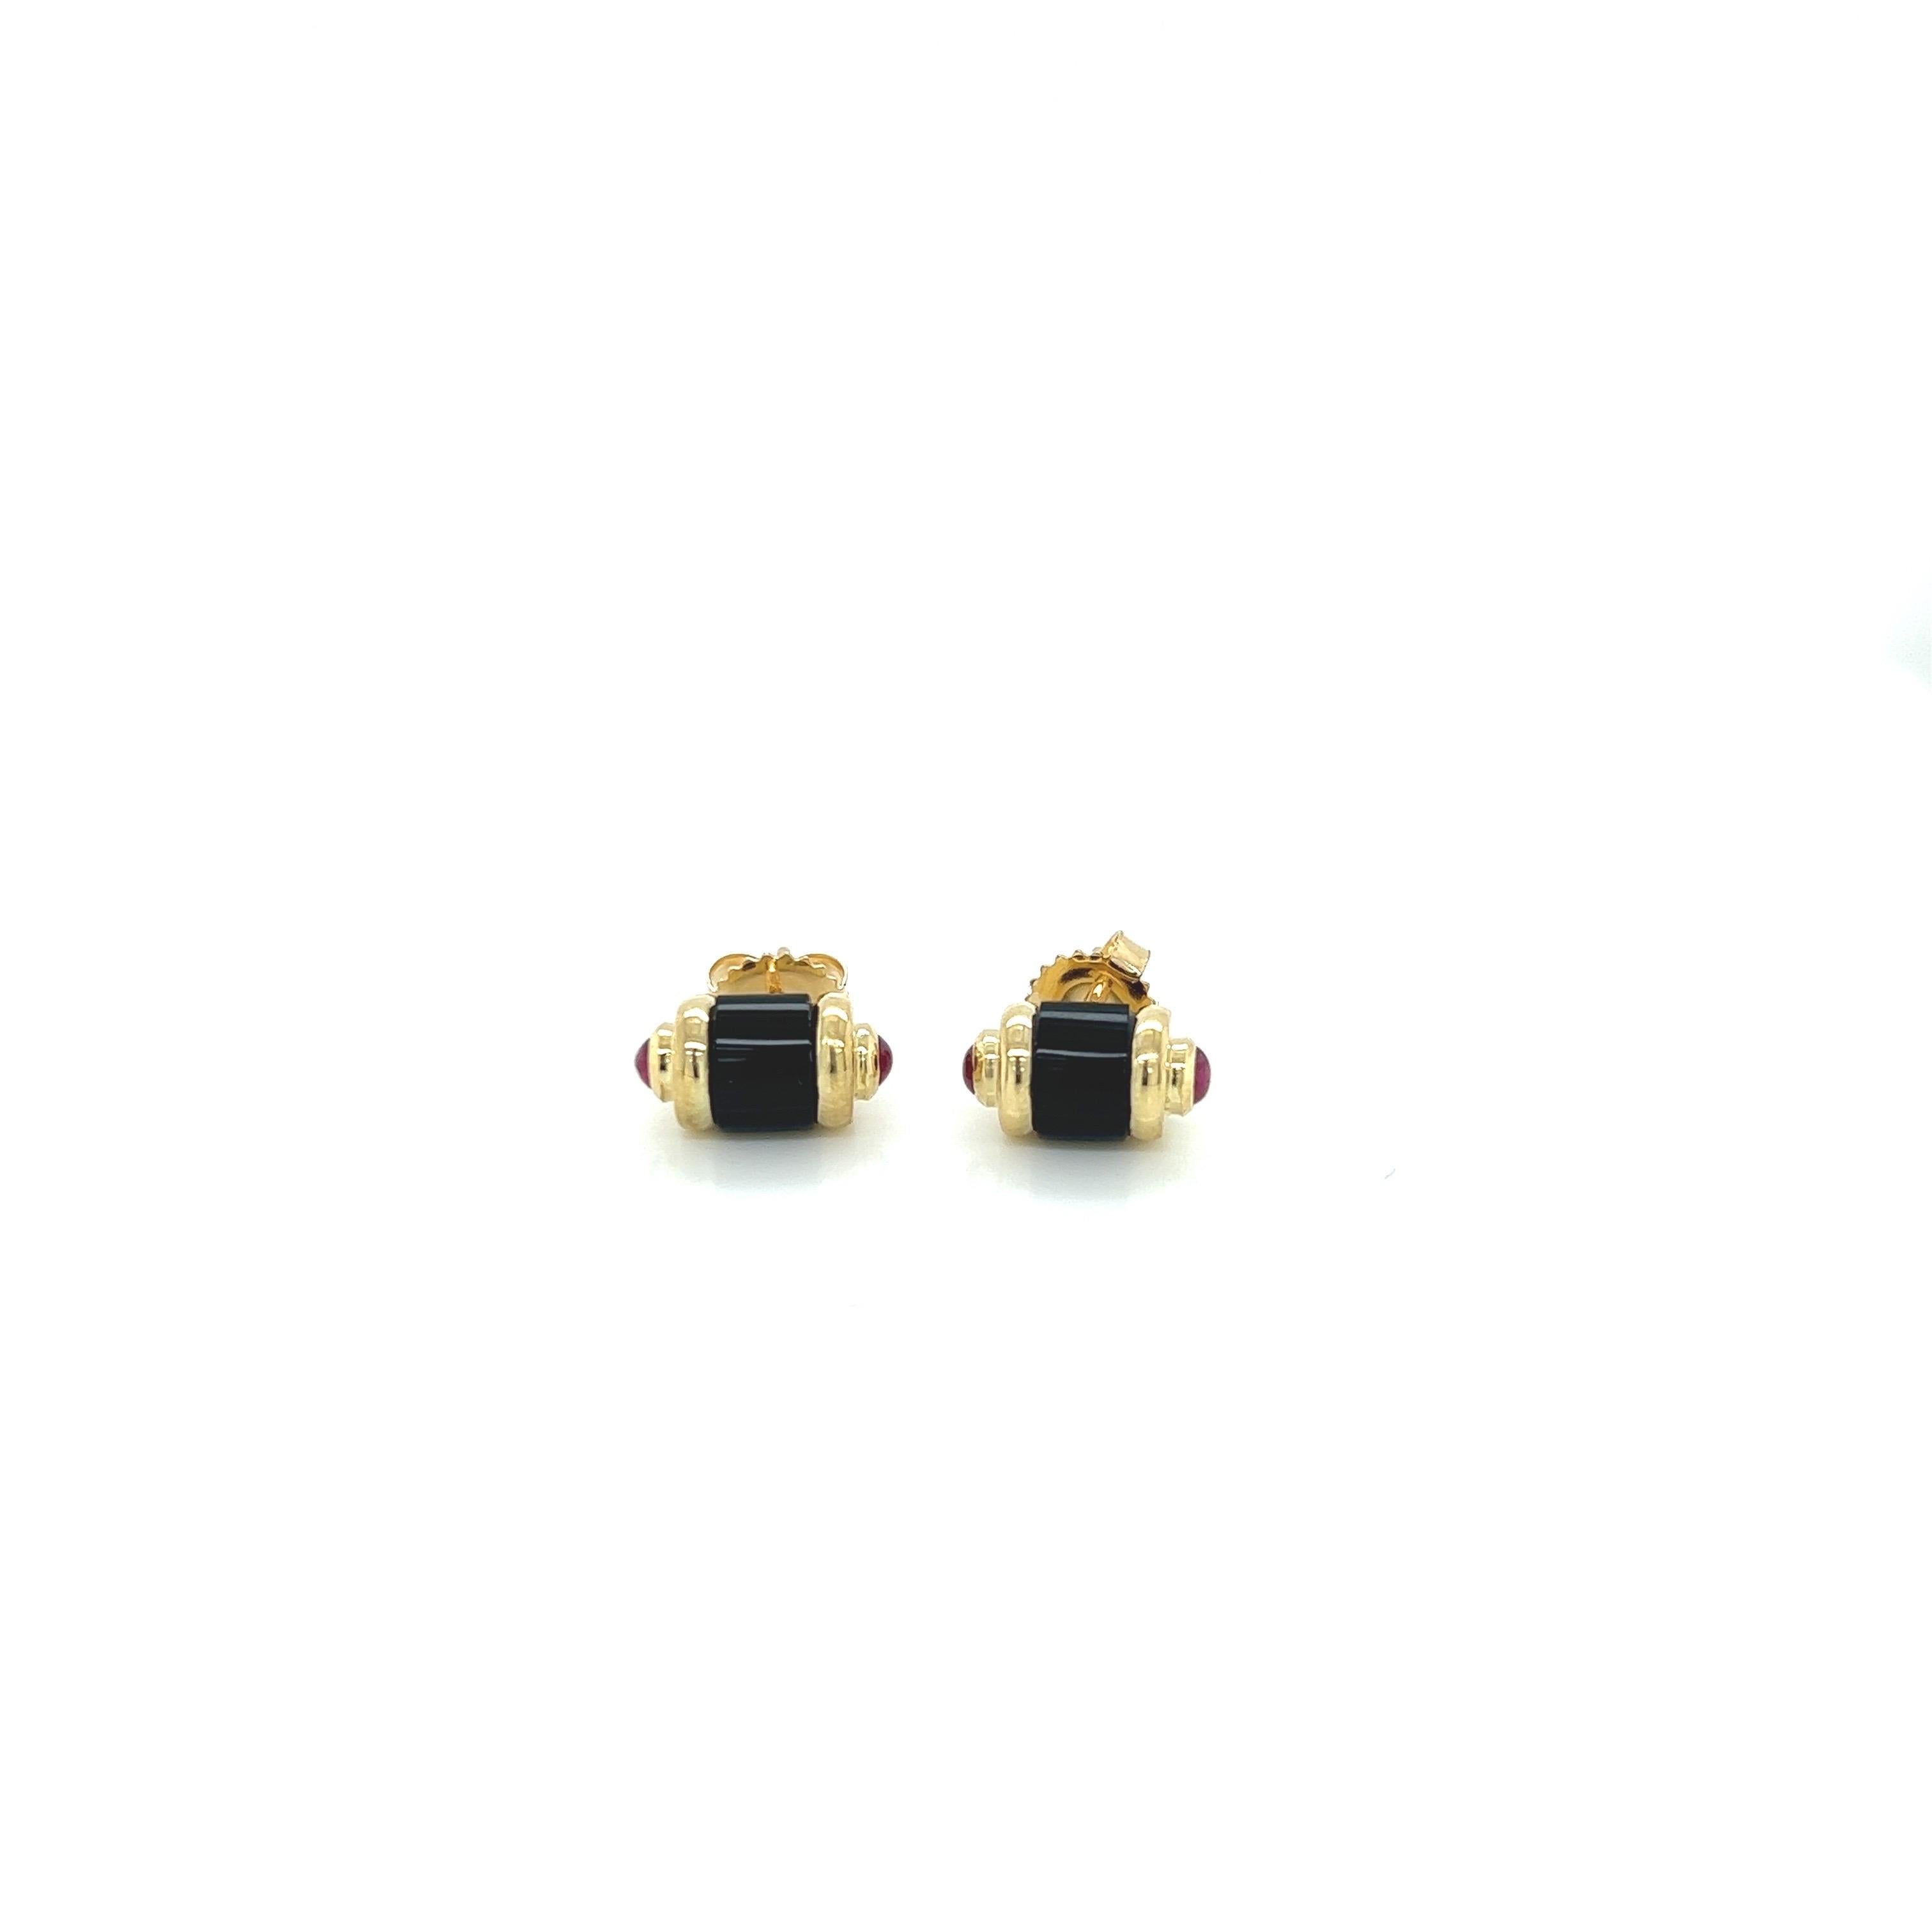 18k Yellow Gold Art Deco Tubular Design Stud Earrings With Hand Cut Black Onyx and Cabochon Rubies On The Sides.
Comes with 18k gold earring backs.

Measures approximately 7mm x 12.5mm